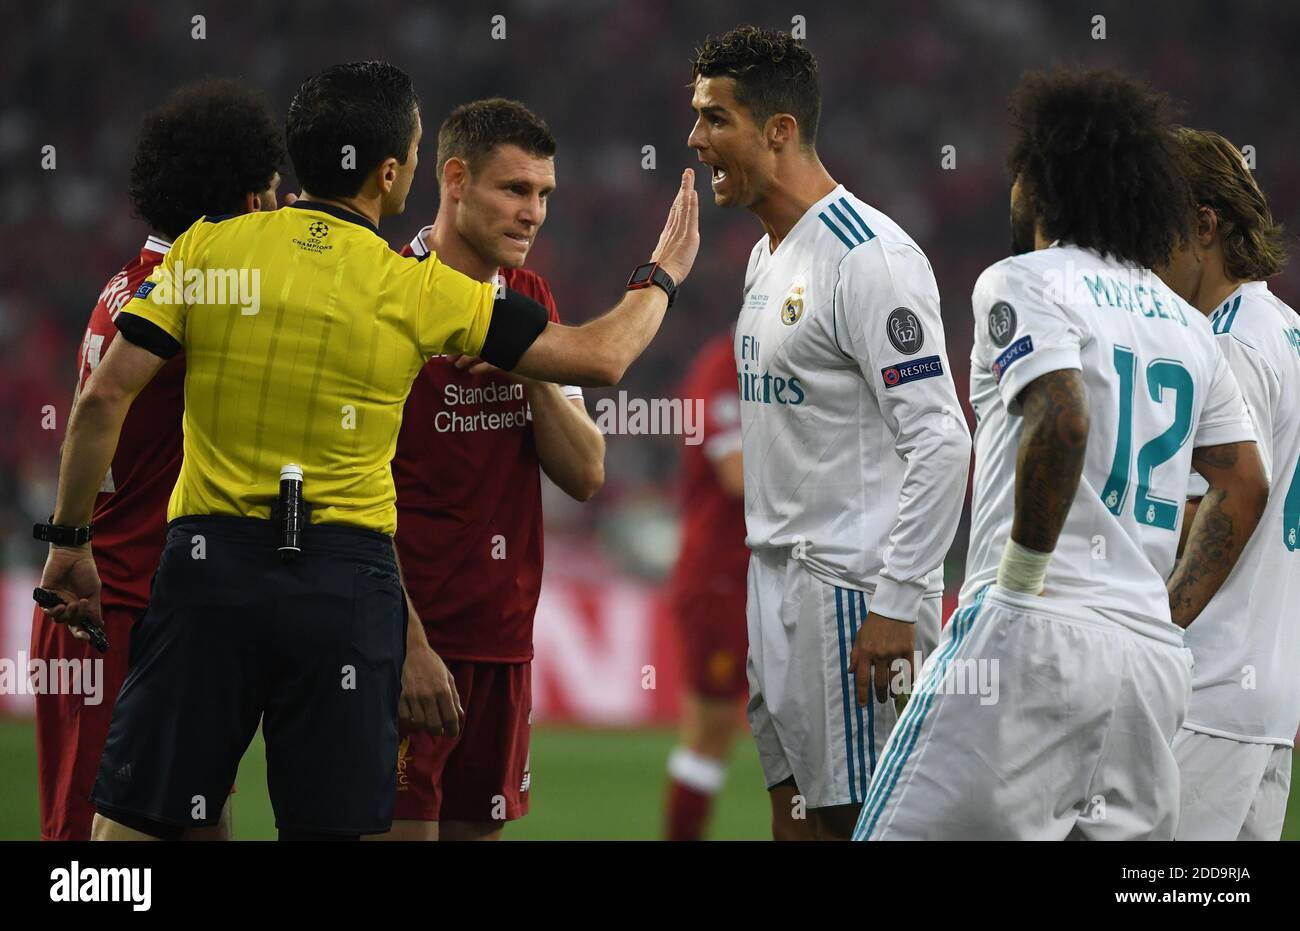 26 May 2018, Ukraine, Kiev: Champions League, Real Madrid vs FC Liverpool, finals at the Olimpiyskiy National Sports Complex. Madrid's Cristiano Ronaldo (C) in discussion with referee Milorad Mazic (L). Liverpool's James Milner is standing beside them. Photo by Ina Fassbender/DPA/ABACAPRESS.COM Stock Photo